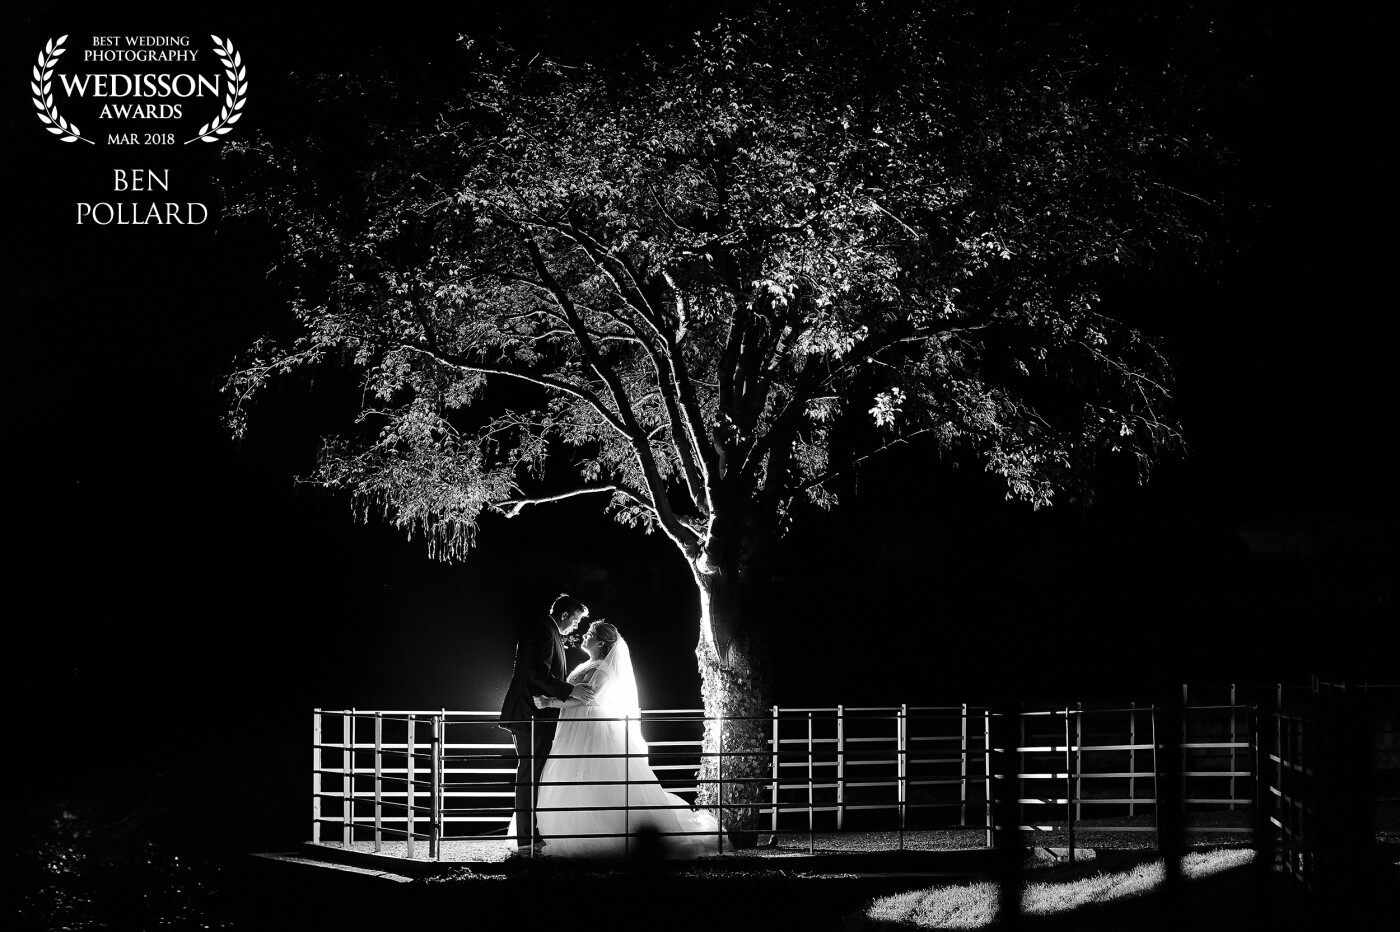 The bride specifically asked for a picture under the tree as she had seen a previous image of mine in this location (one that had also won a Wedisson Award) a year earlier. Happy to oblige i put a different spin on the same location and popped another great image!